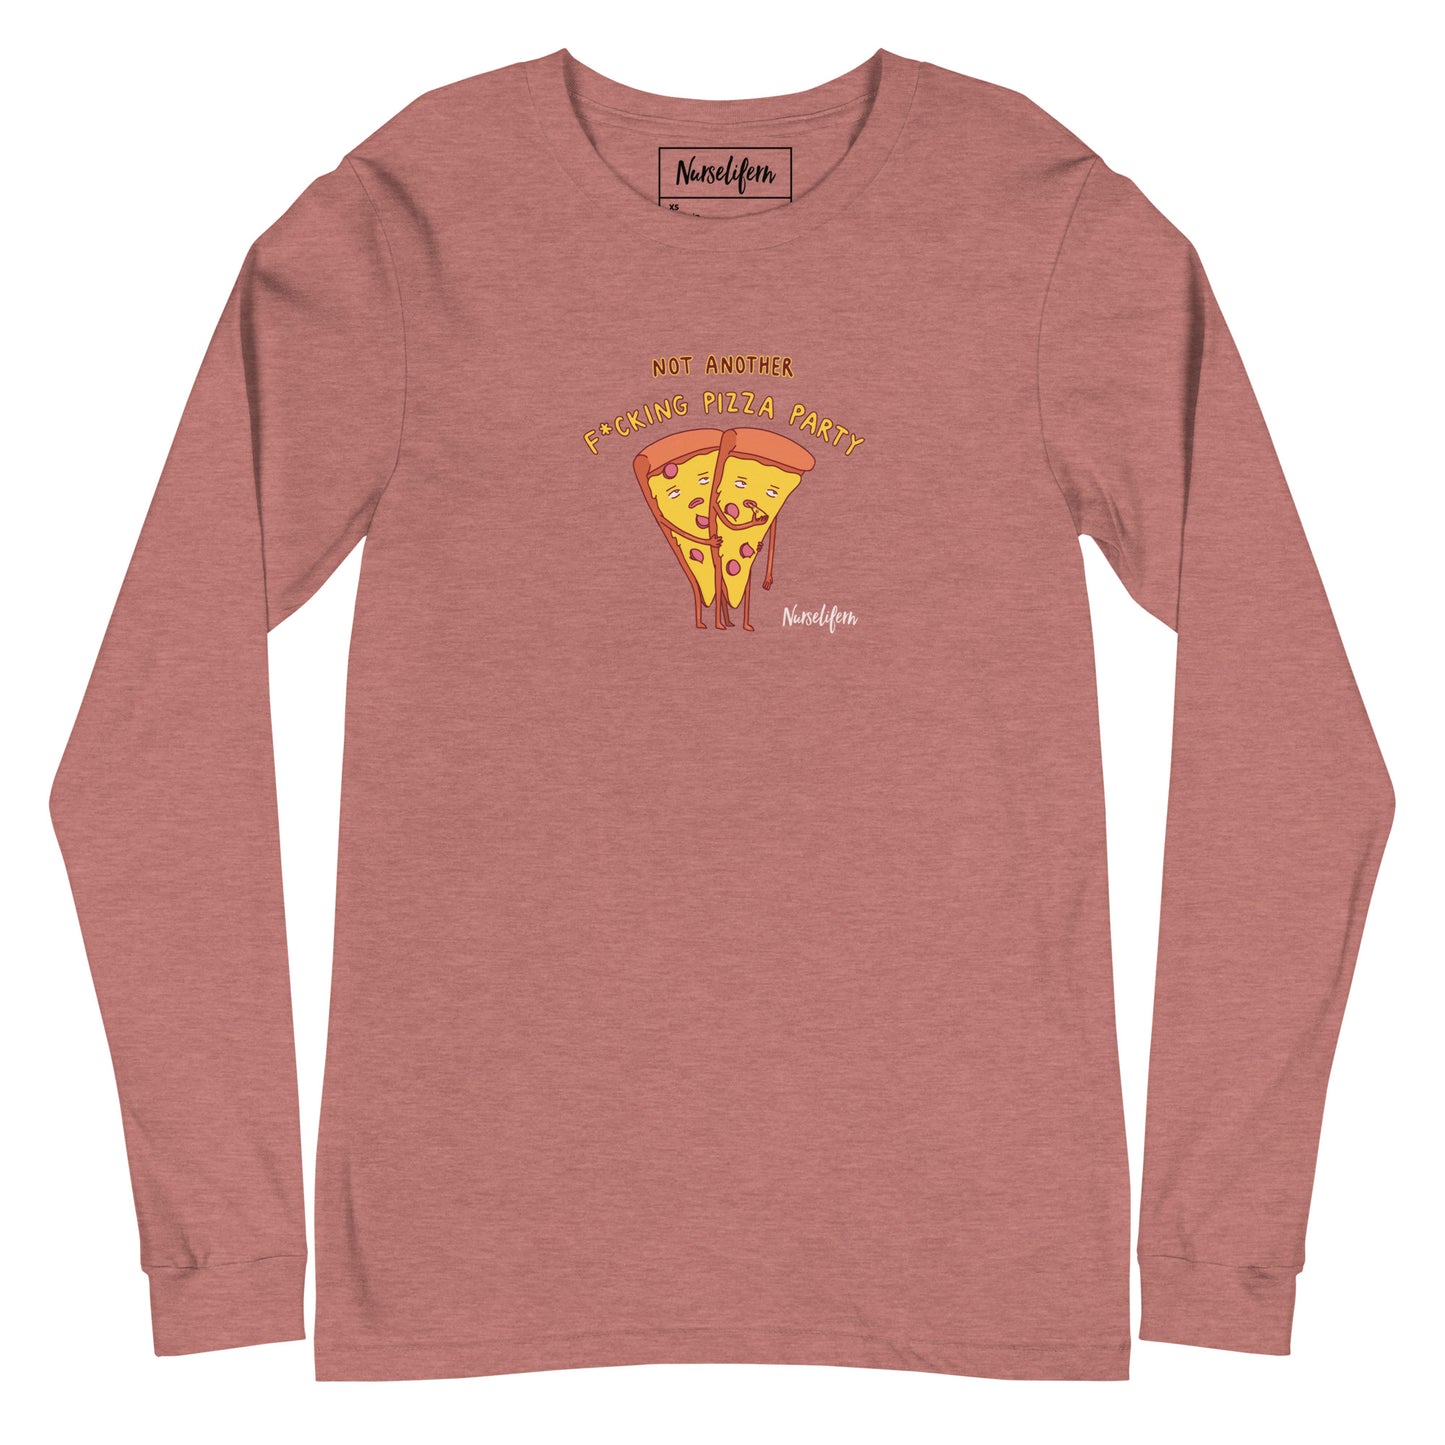 Not Another F*cking Pizza Party Long-sleeve